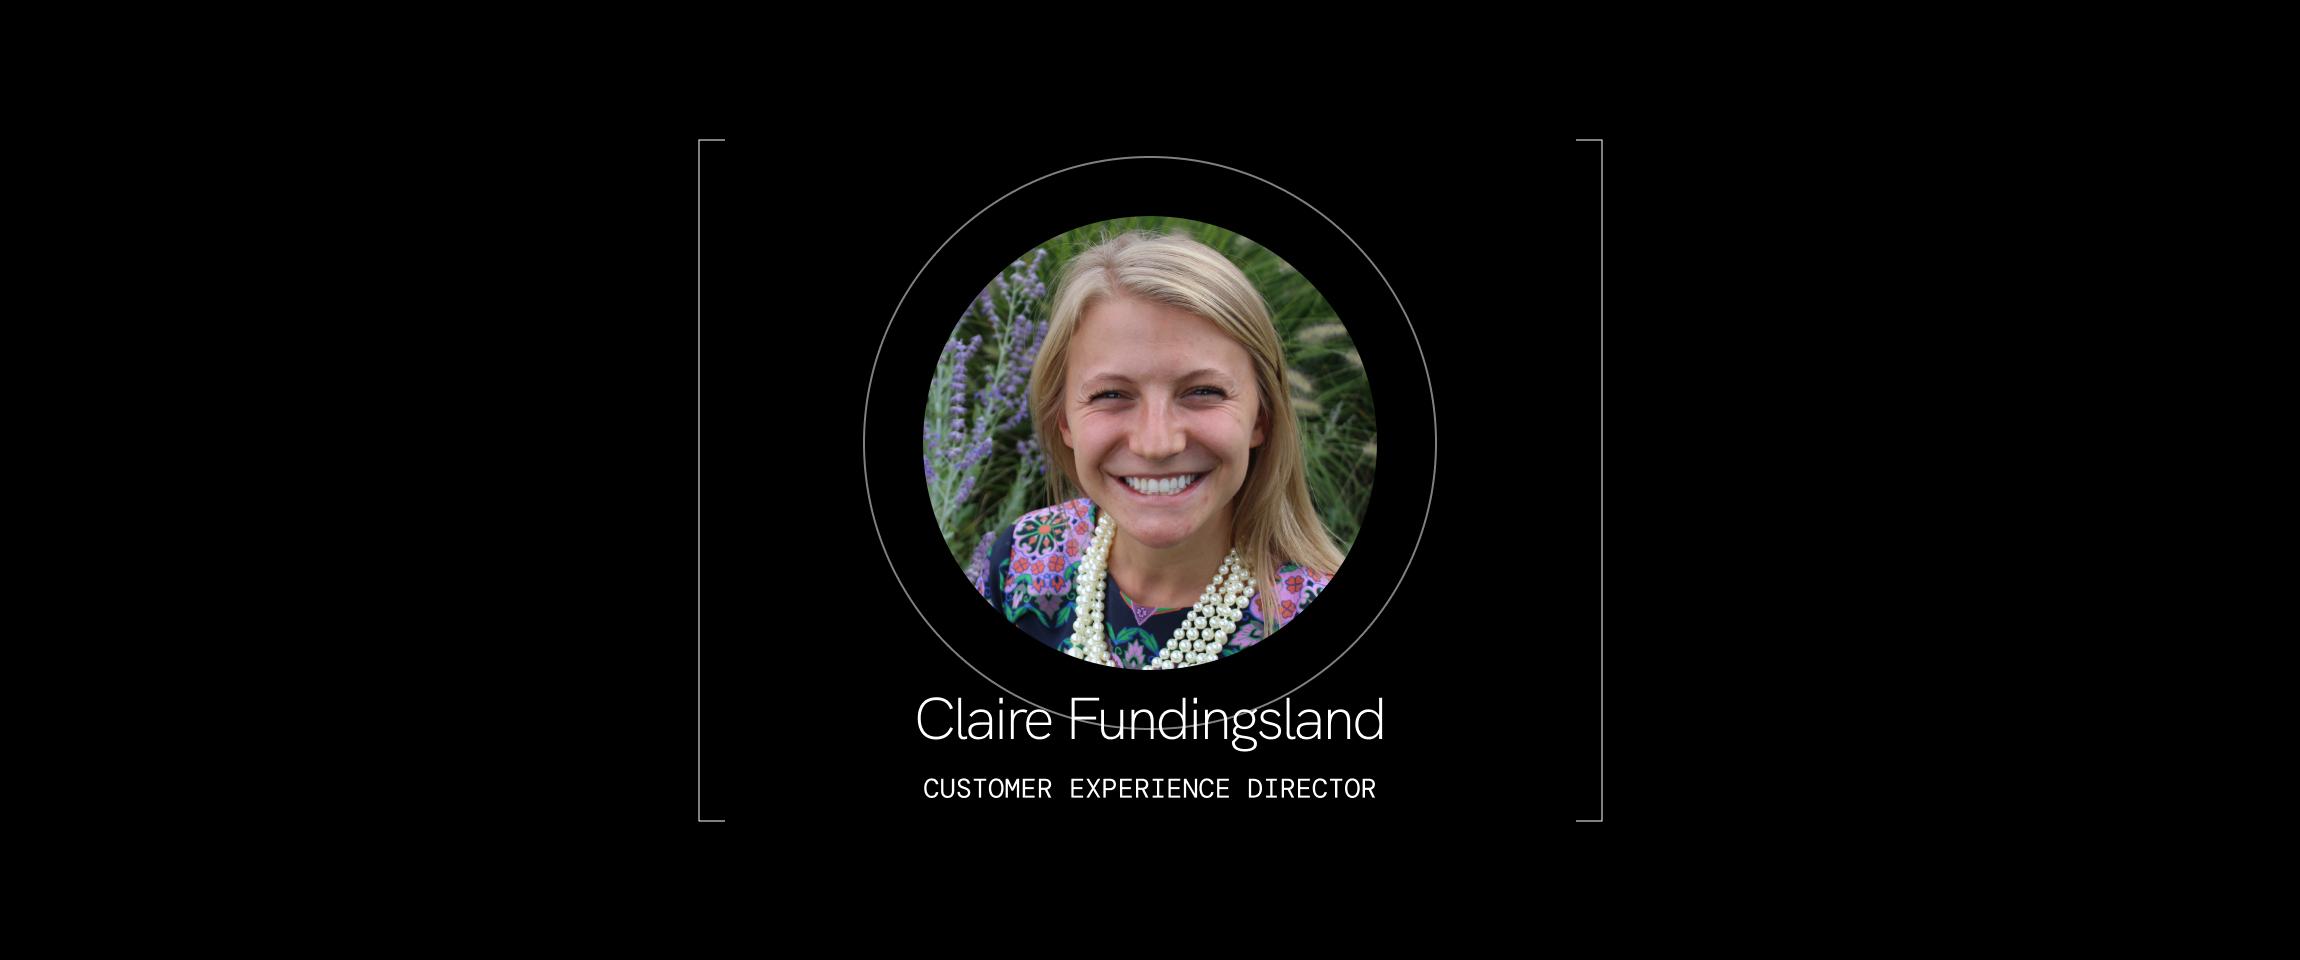 Claire Fundingsland, Customer Experience Director